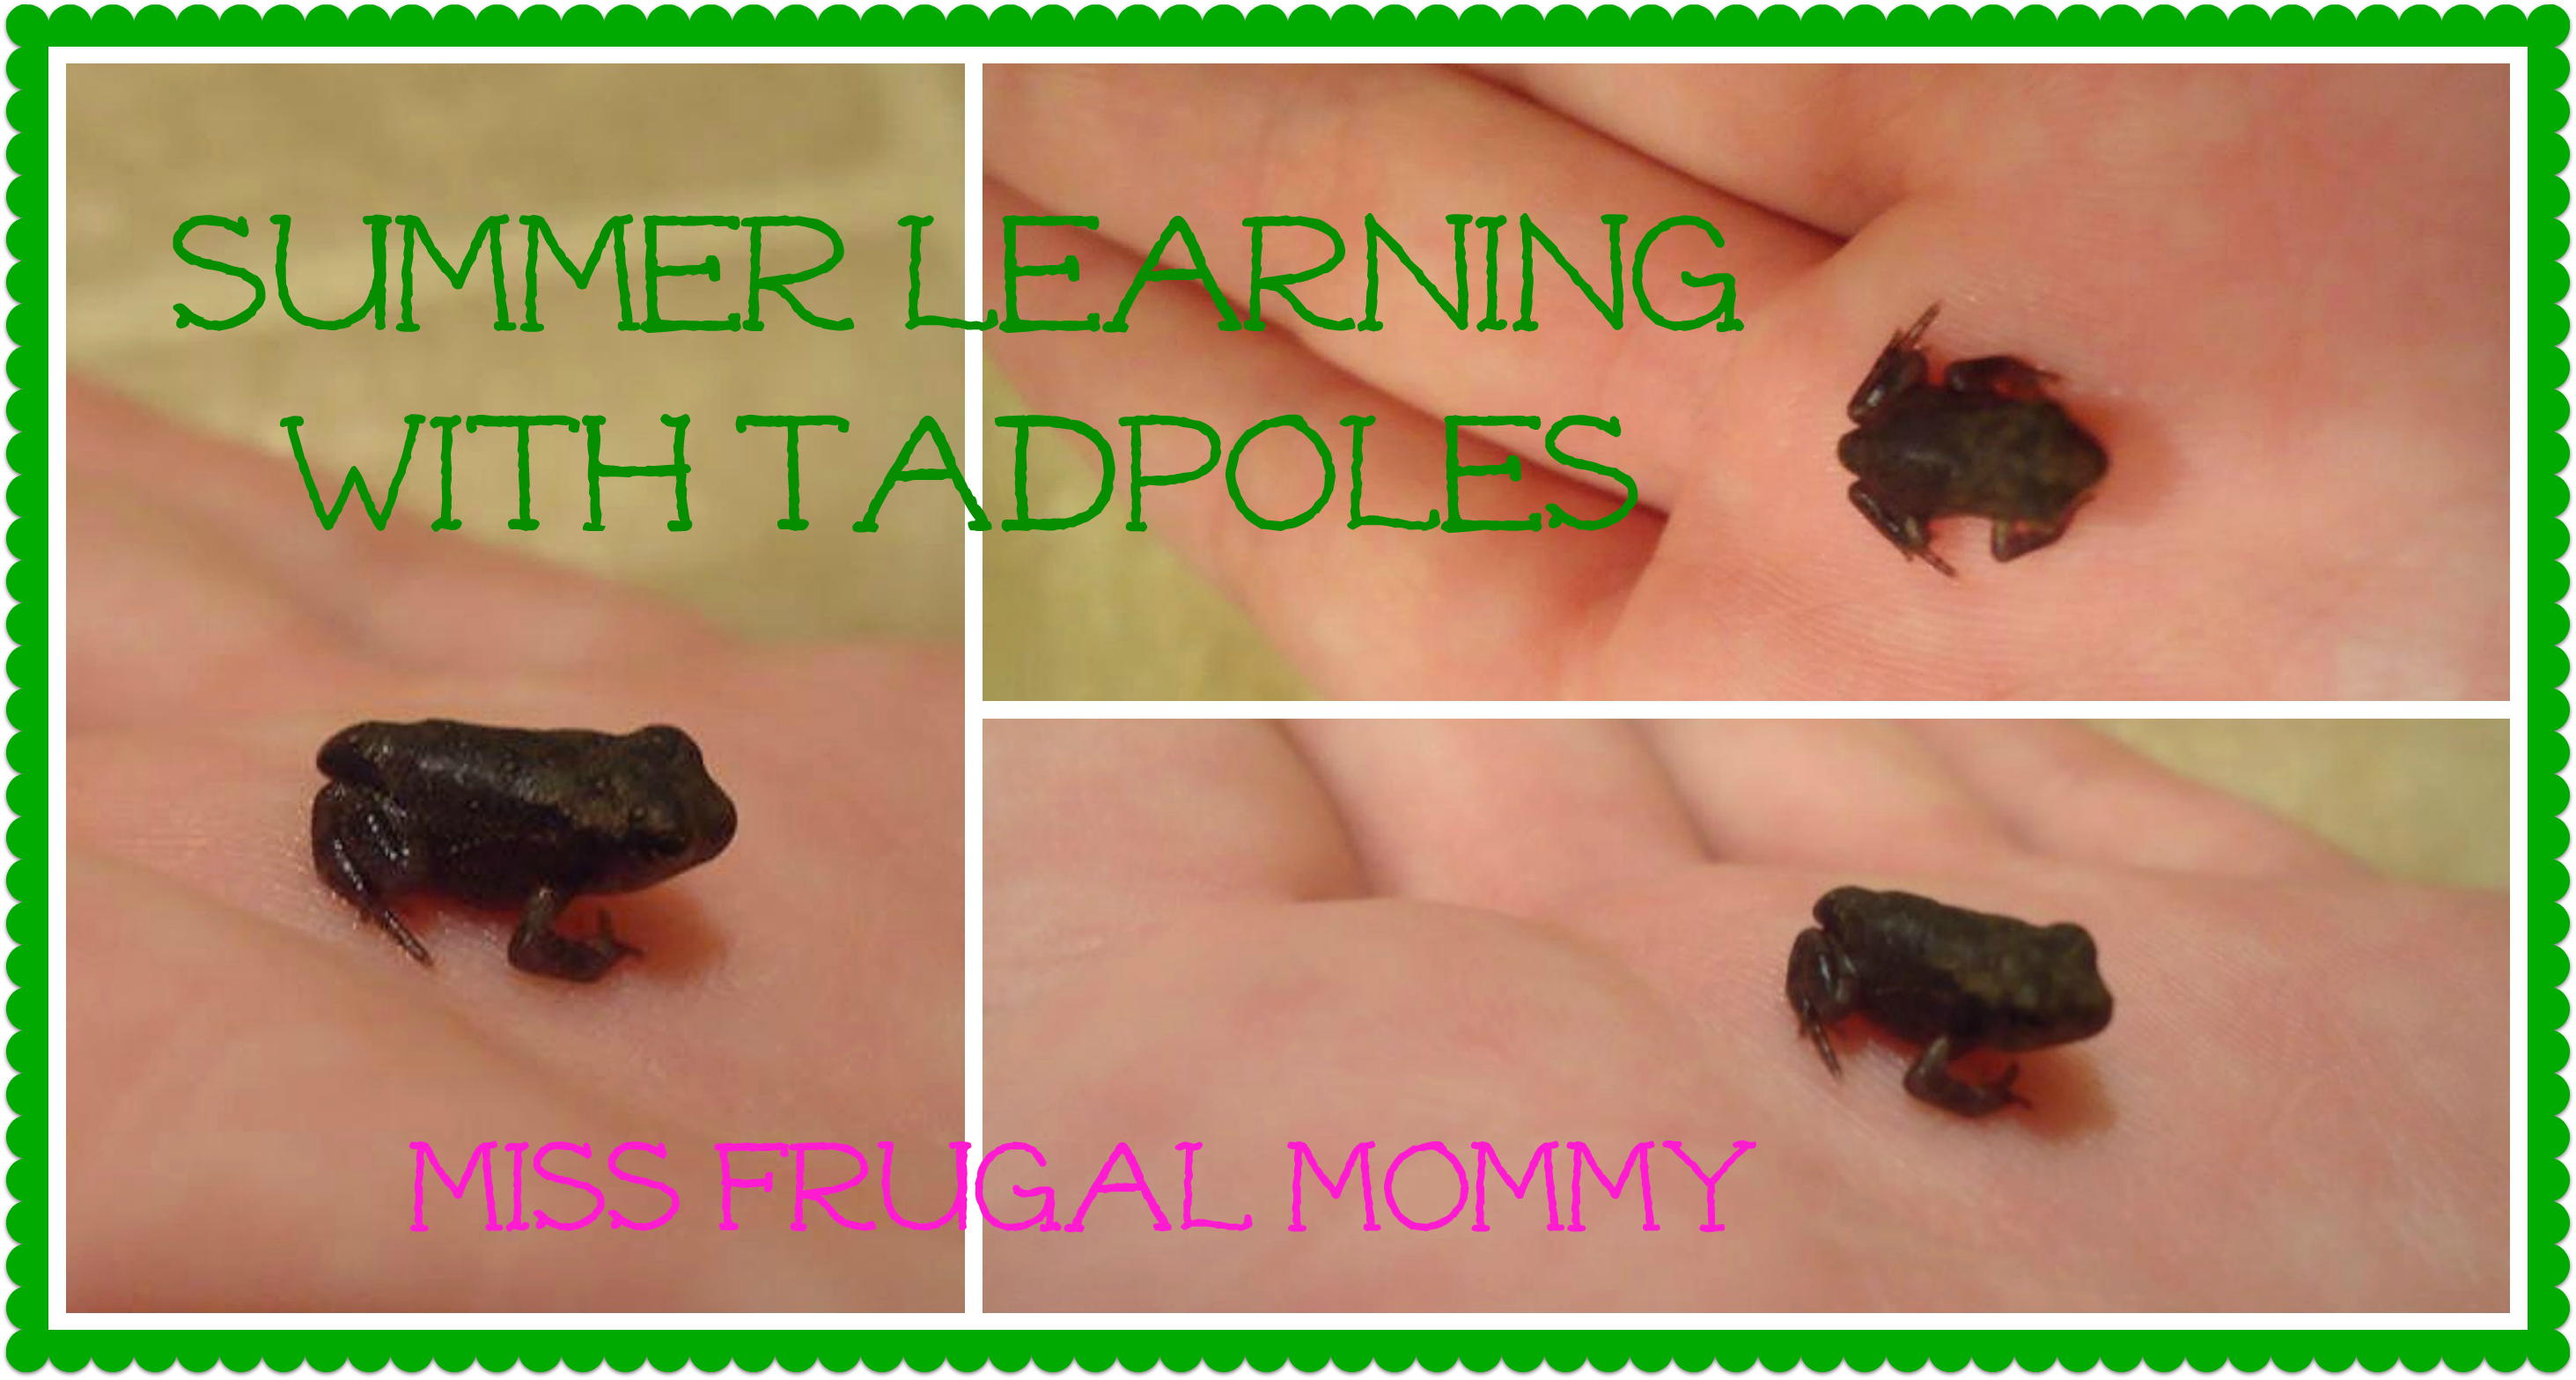 http://missfrugalmommy.com/wp-content/uploads/2013/07/froggy5.png